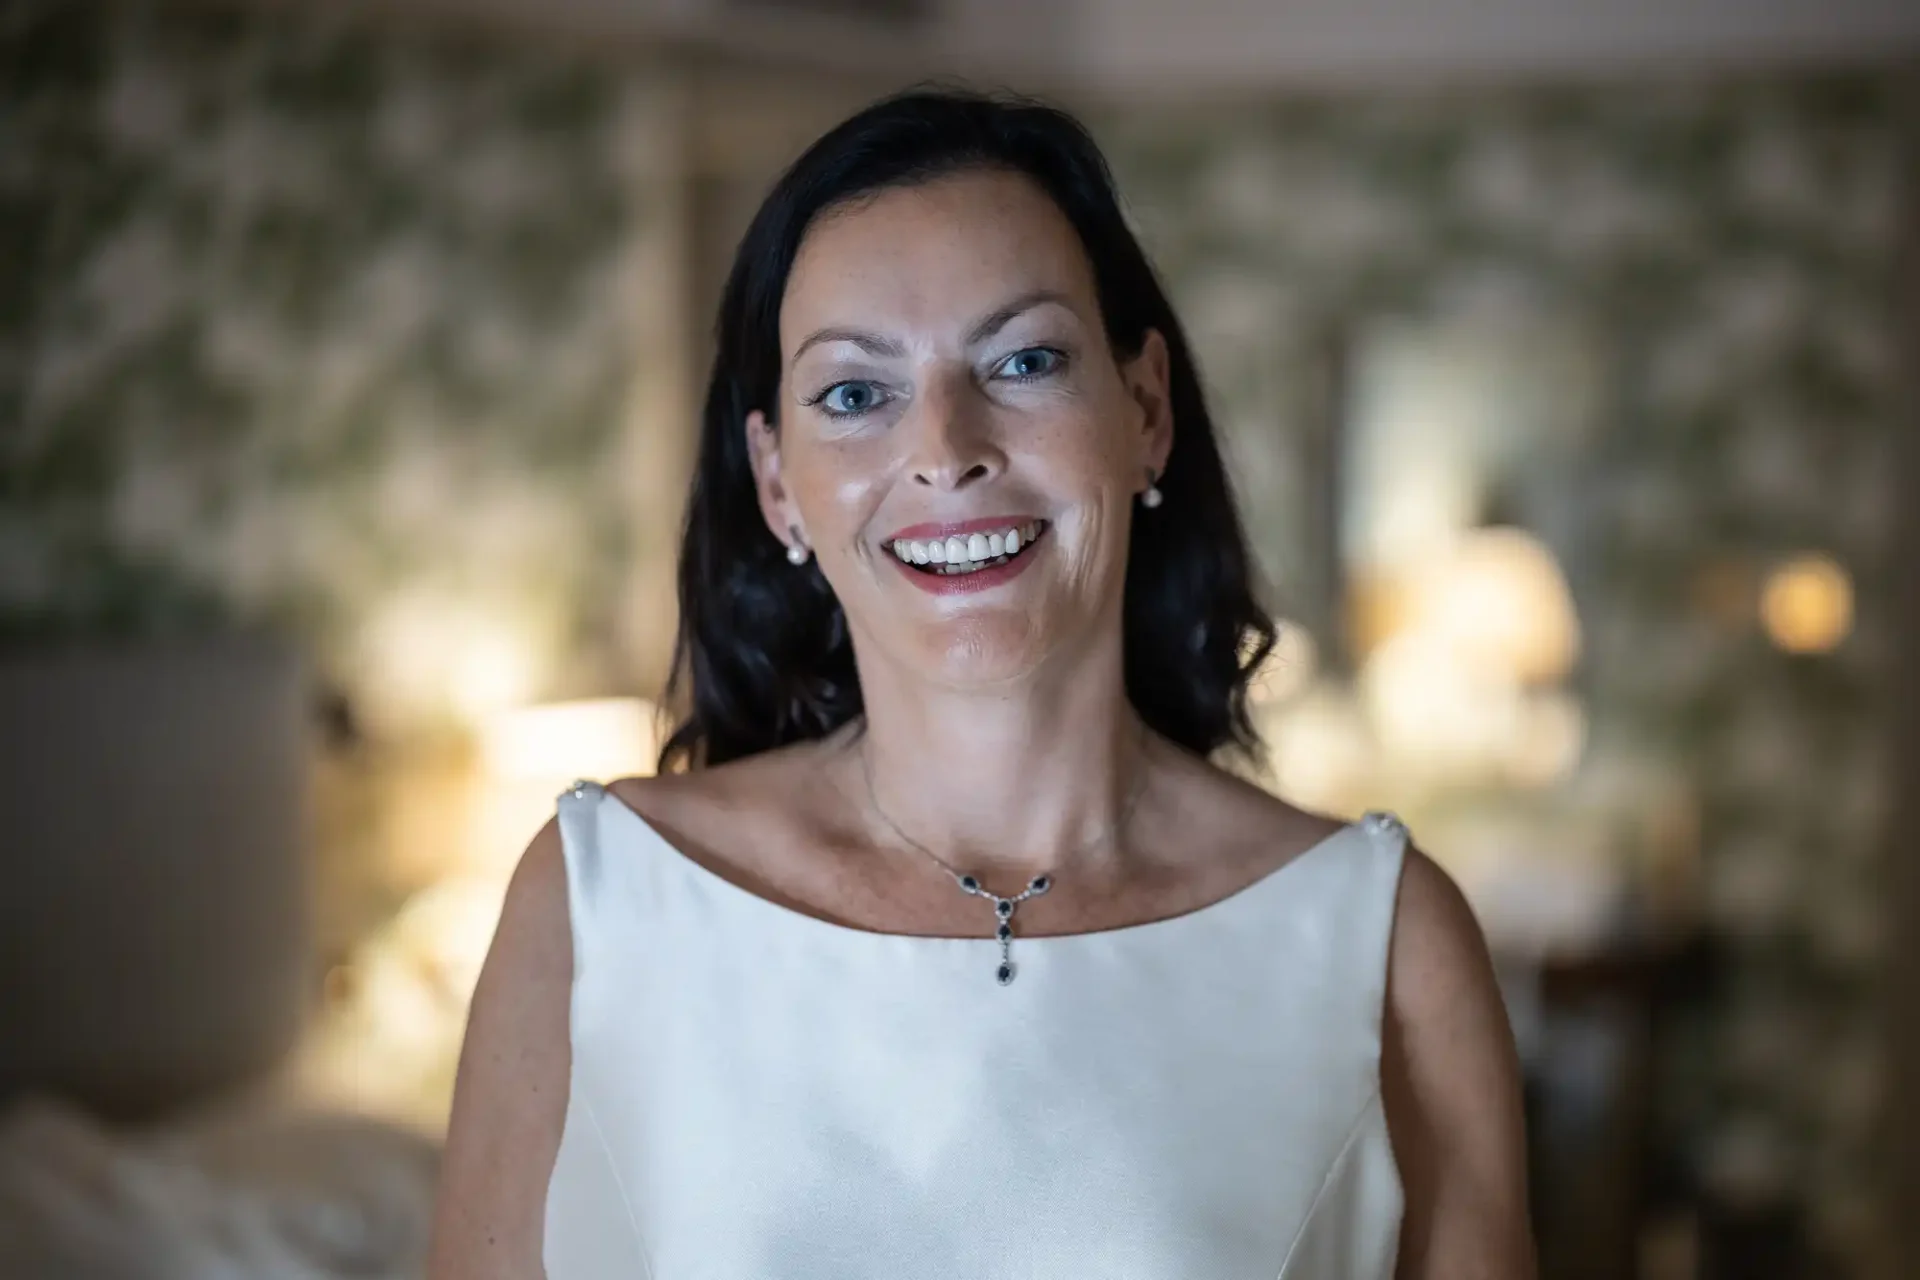 A smiling woman with dark hair, wearing a sleeveless white dress and a pendant necklace, stands in a softly lit room with floral wallpaper.